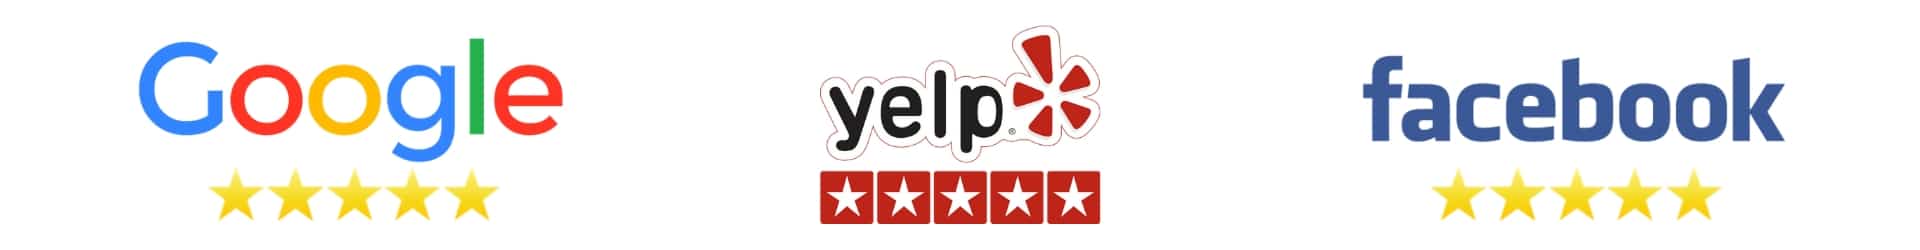 Google, yelp, and facebook five star ratings for Docere Medical Spa & Laser Center.